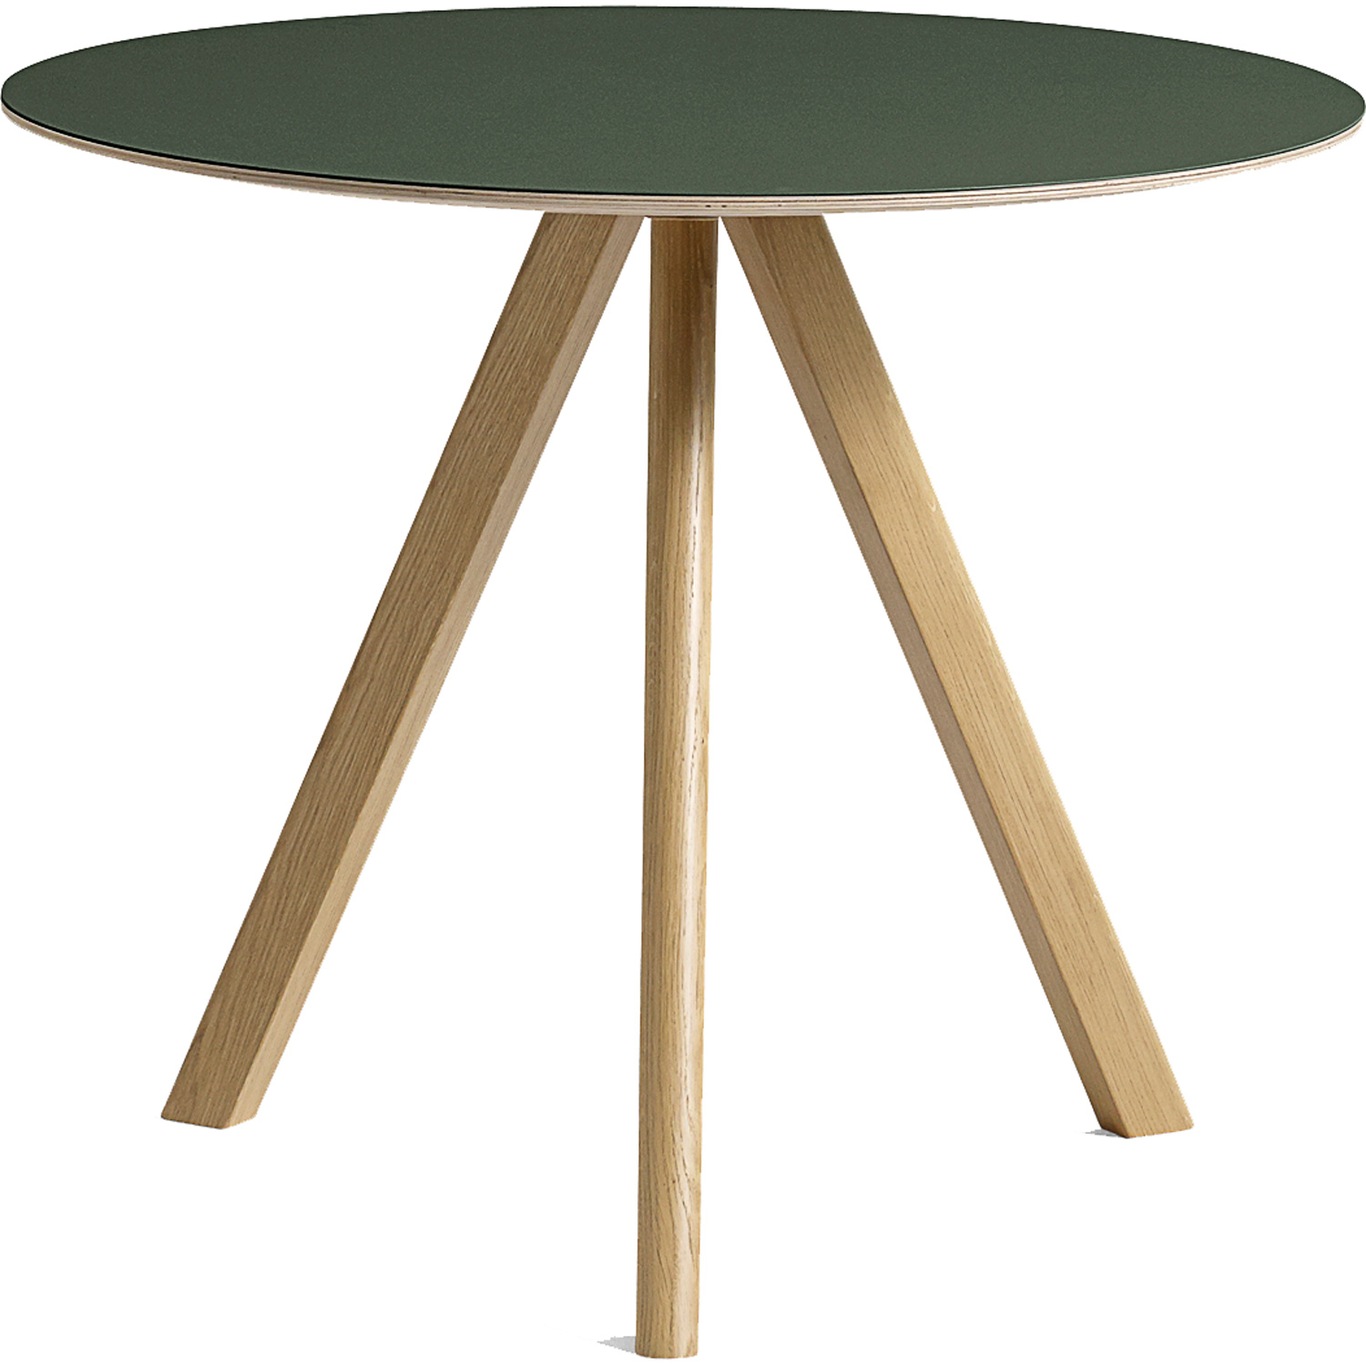 CPH20 Table Ø90x74 cm, Water based lacquered Oak / Green Linoleum